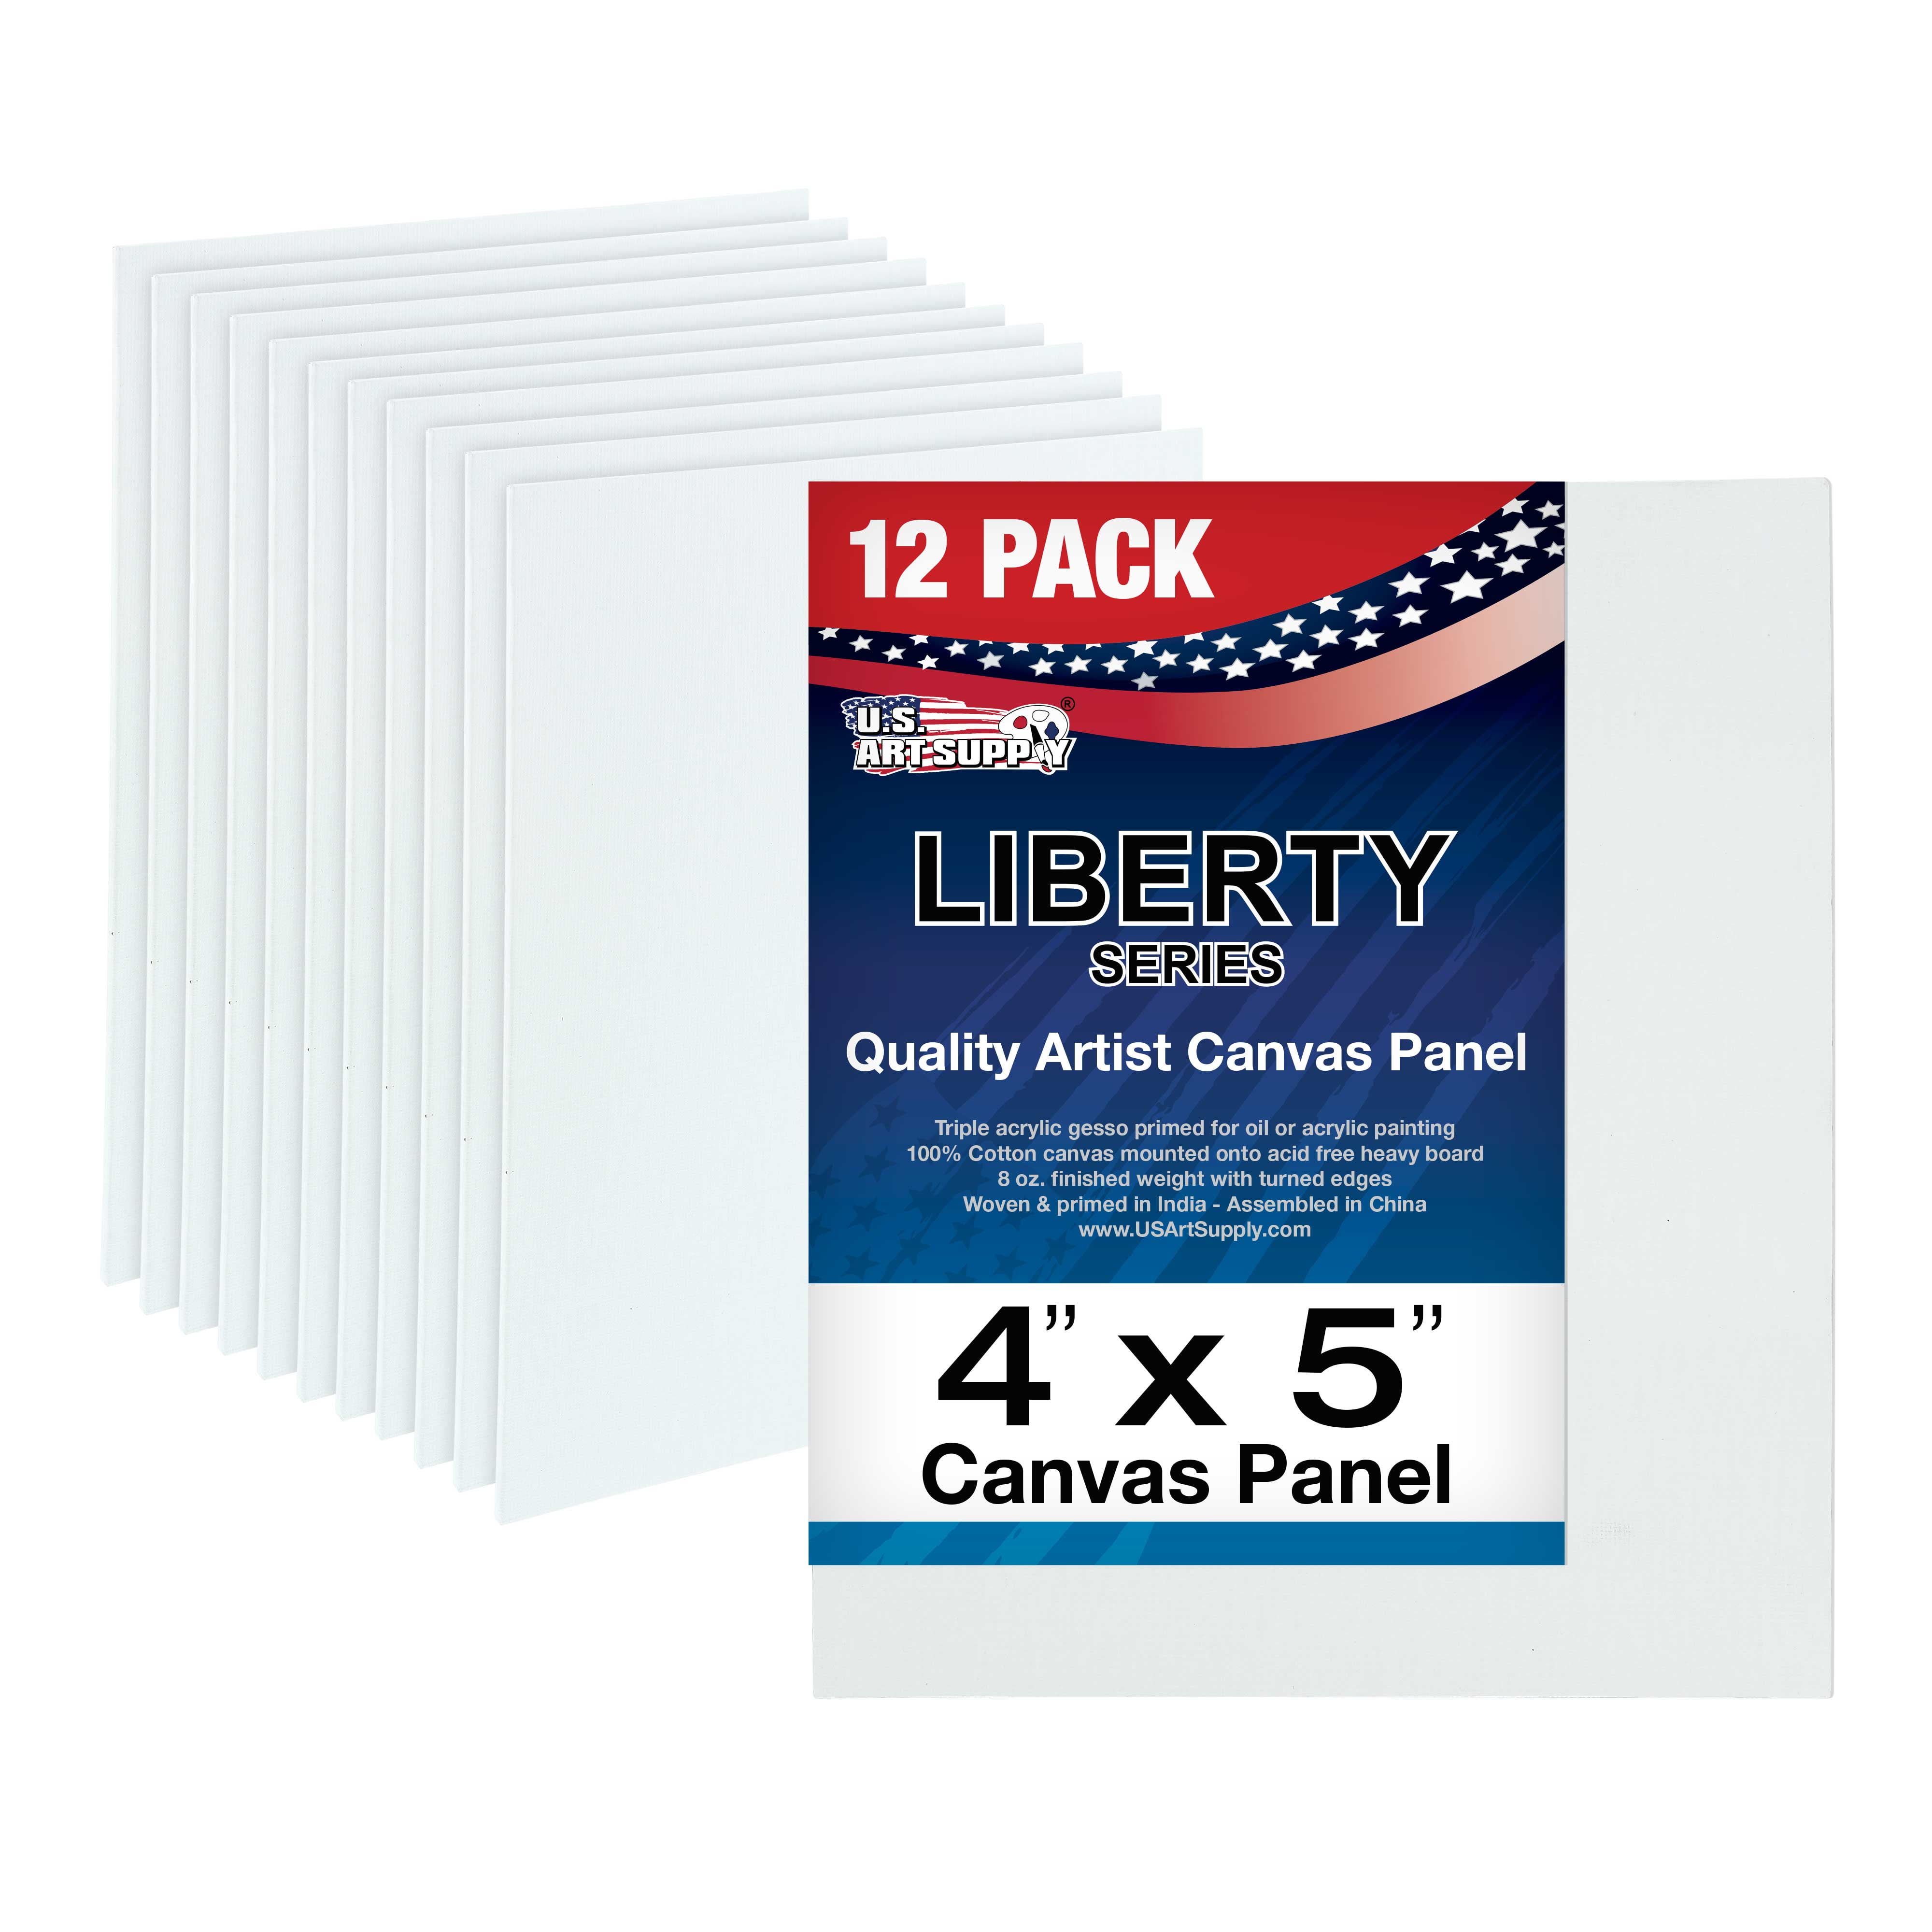  4 Packs Square Canvases for Painting with 4x 4, 6x